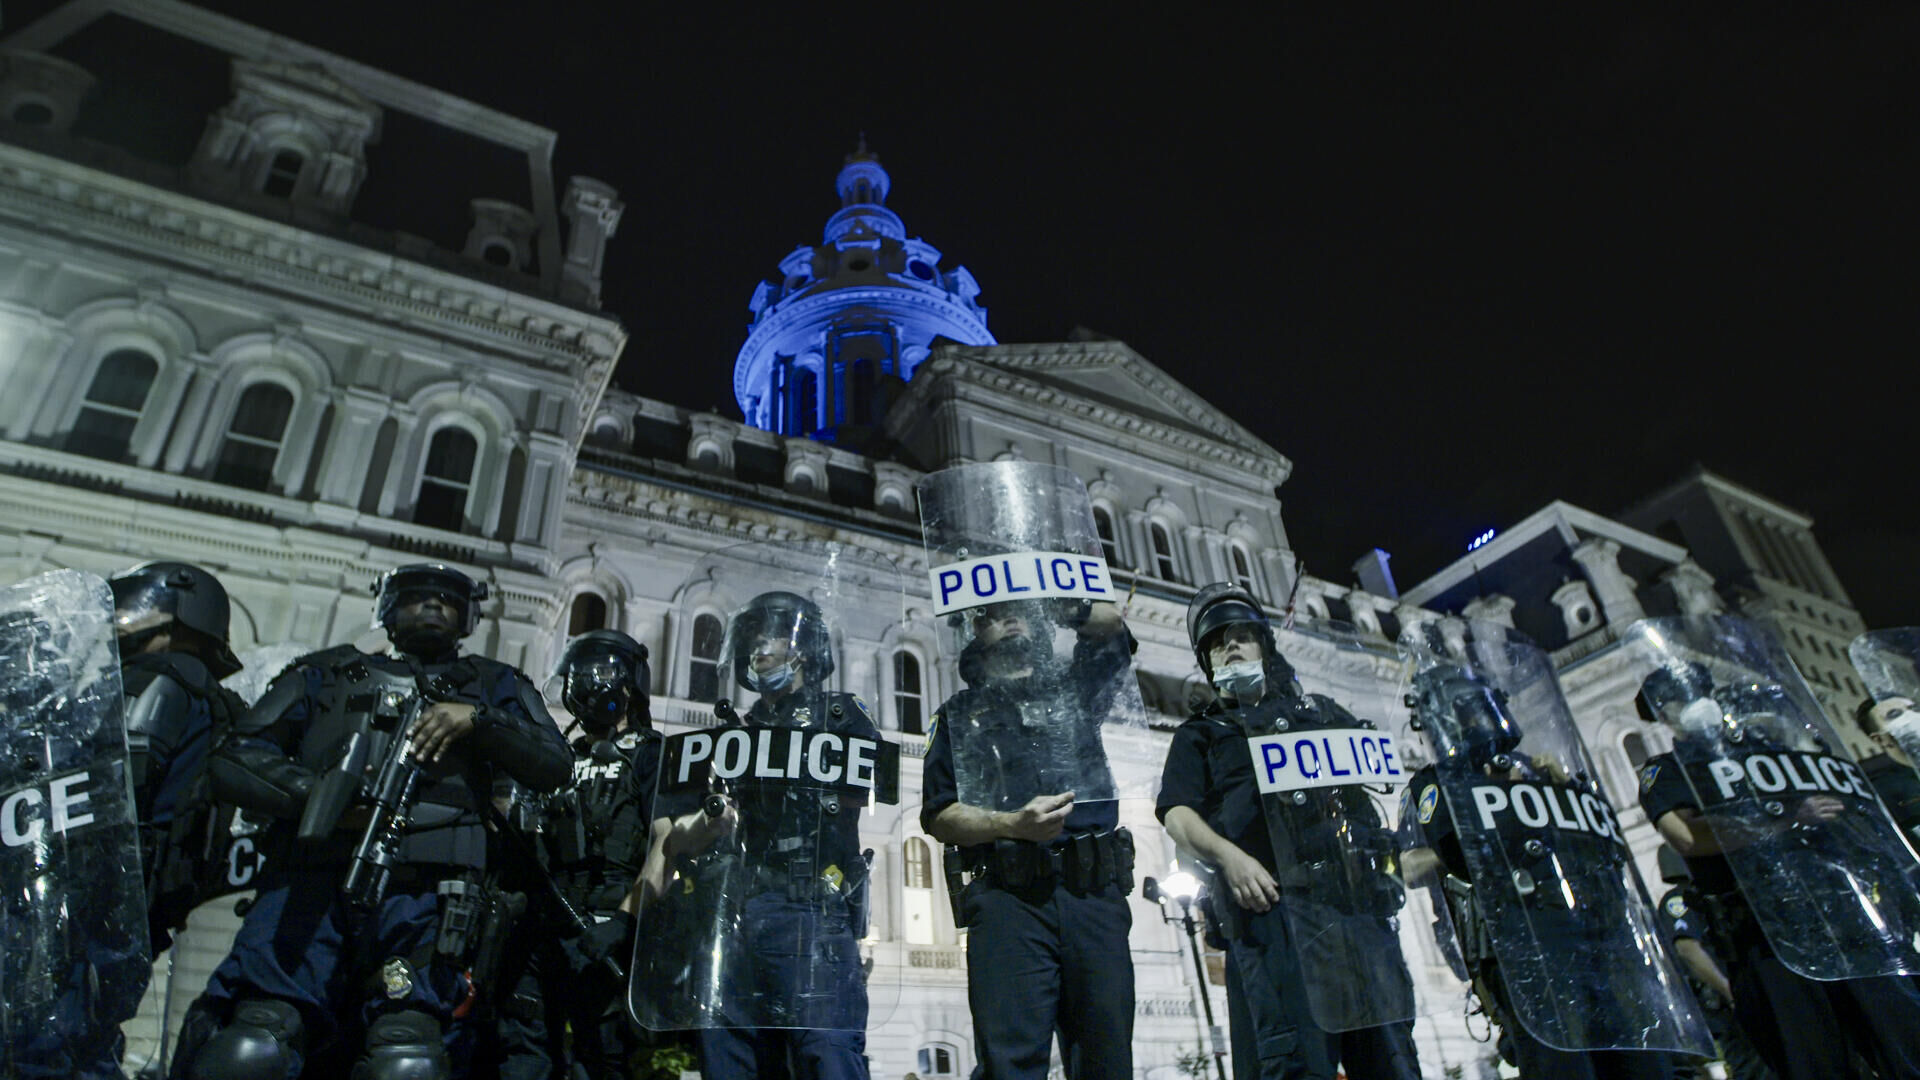 TheBodyPolitic_#3 _revised_Image of Riot Police and Baltimore City Hall_photo credit TBP_Copy